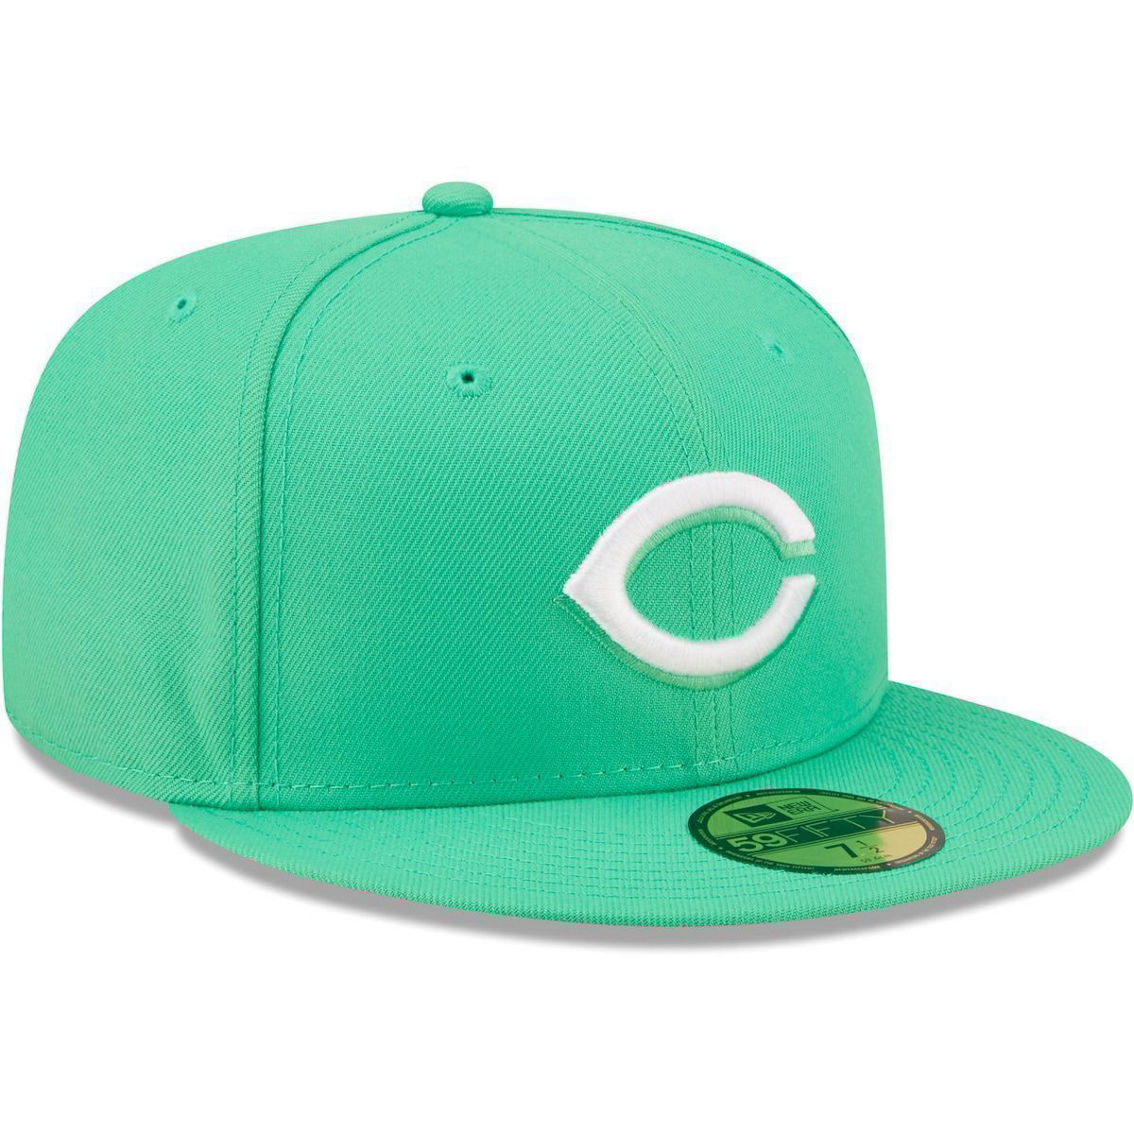 New Era Men's Green Cincinnati Reds Logo 59FIFTY Fitted Hat - Image 4 of 4